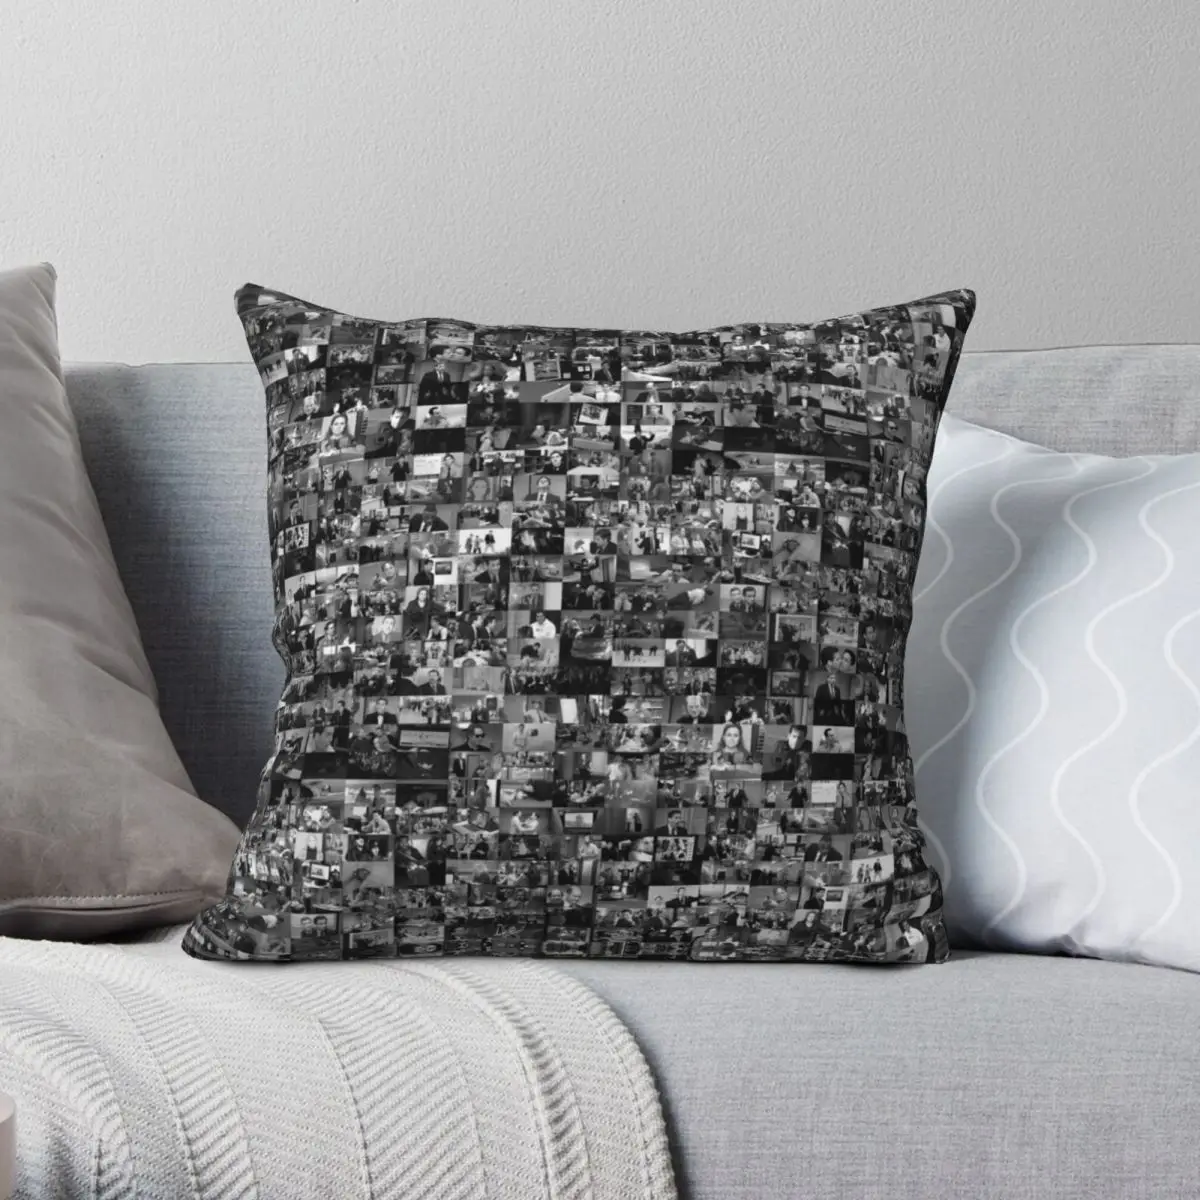 

Every Episode Of The Office Square Pillowcase Polyester Linen Velvet Printed Zip Decor Car Cushion Cover